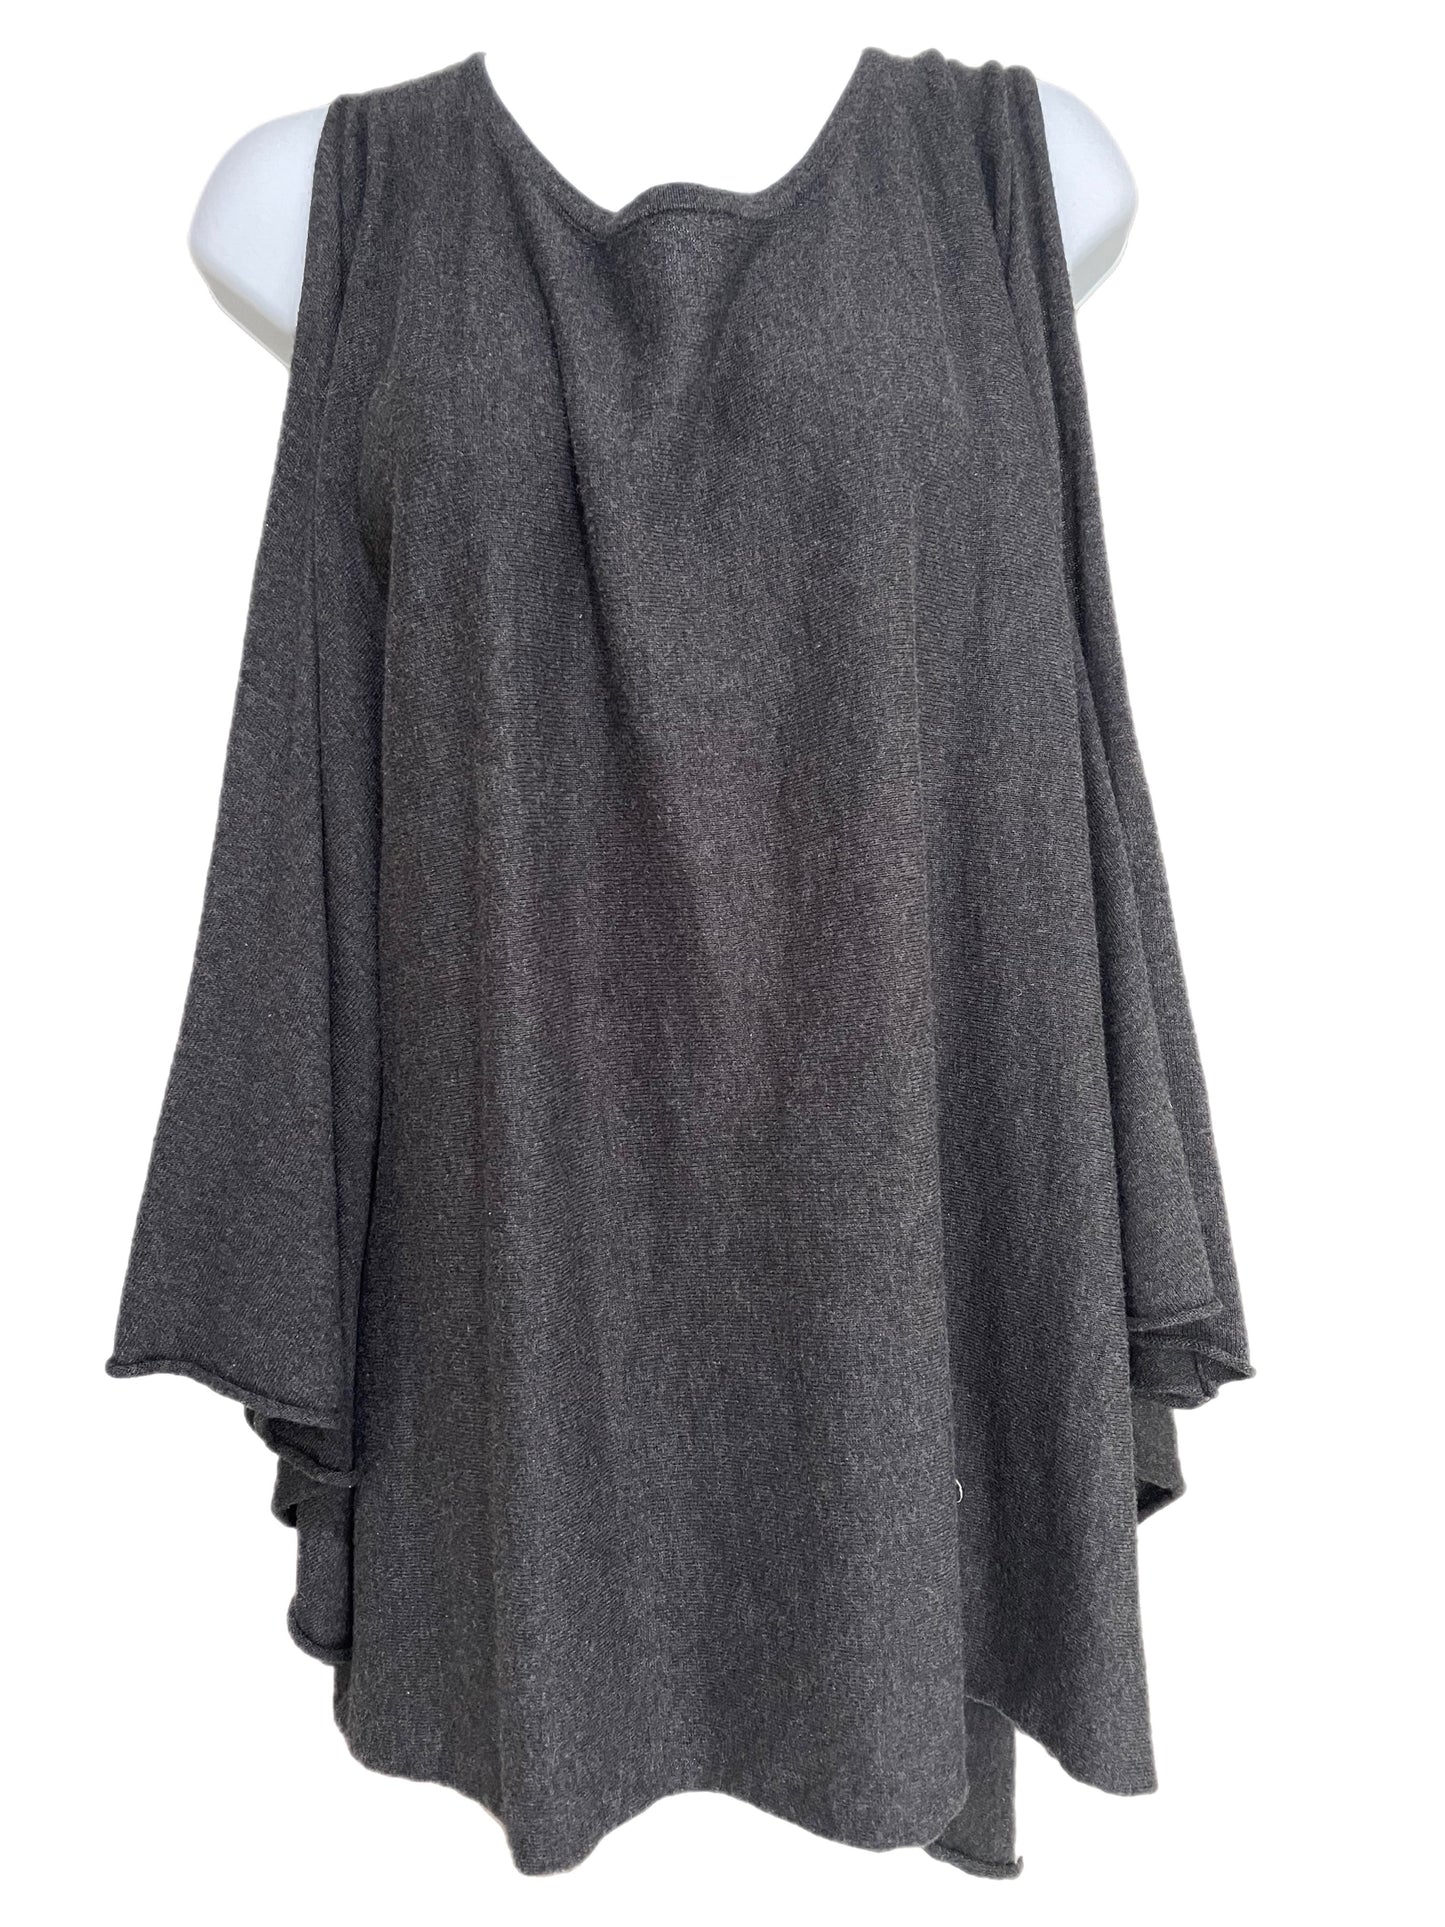 Shirt-Poncho Style w/ Oversized Armholes- Gray Colored- By Max Studio